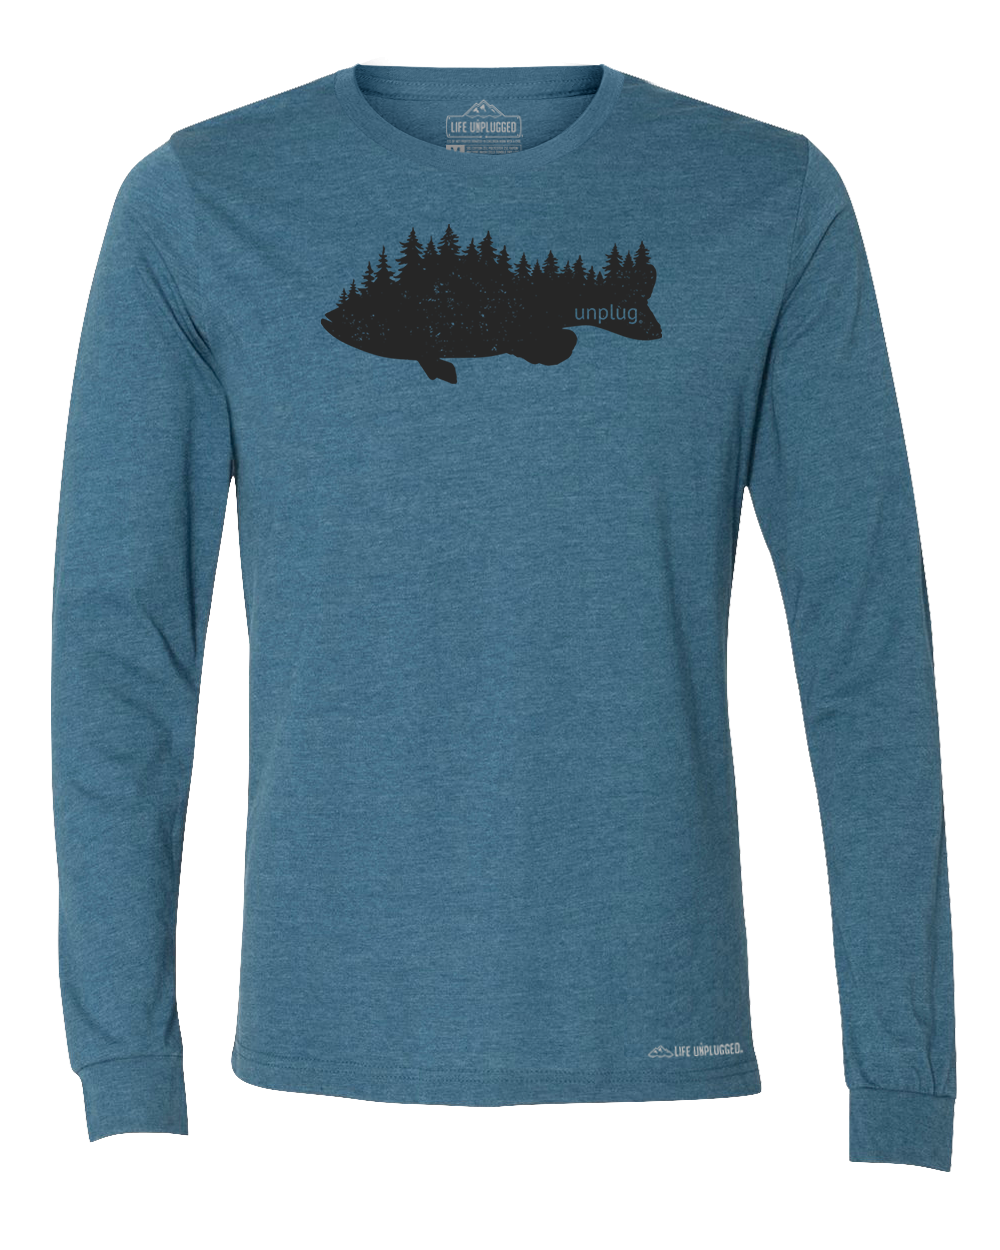 Bass In The Trees Premium Polyblend Long Sleeve T-Shirt - Life Unplugged